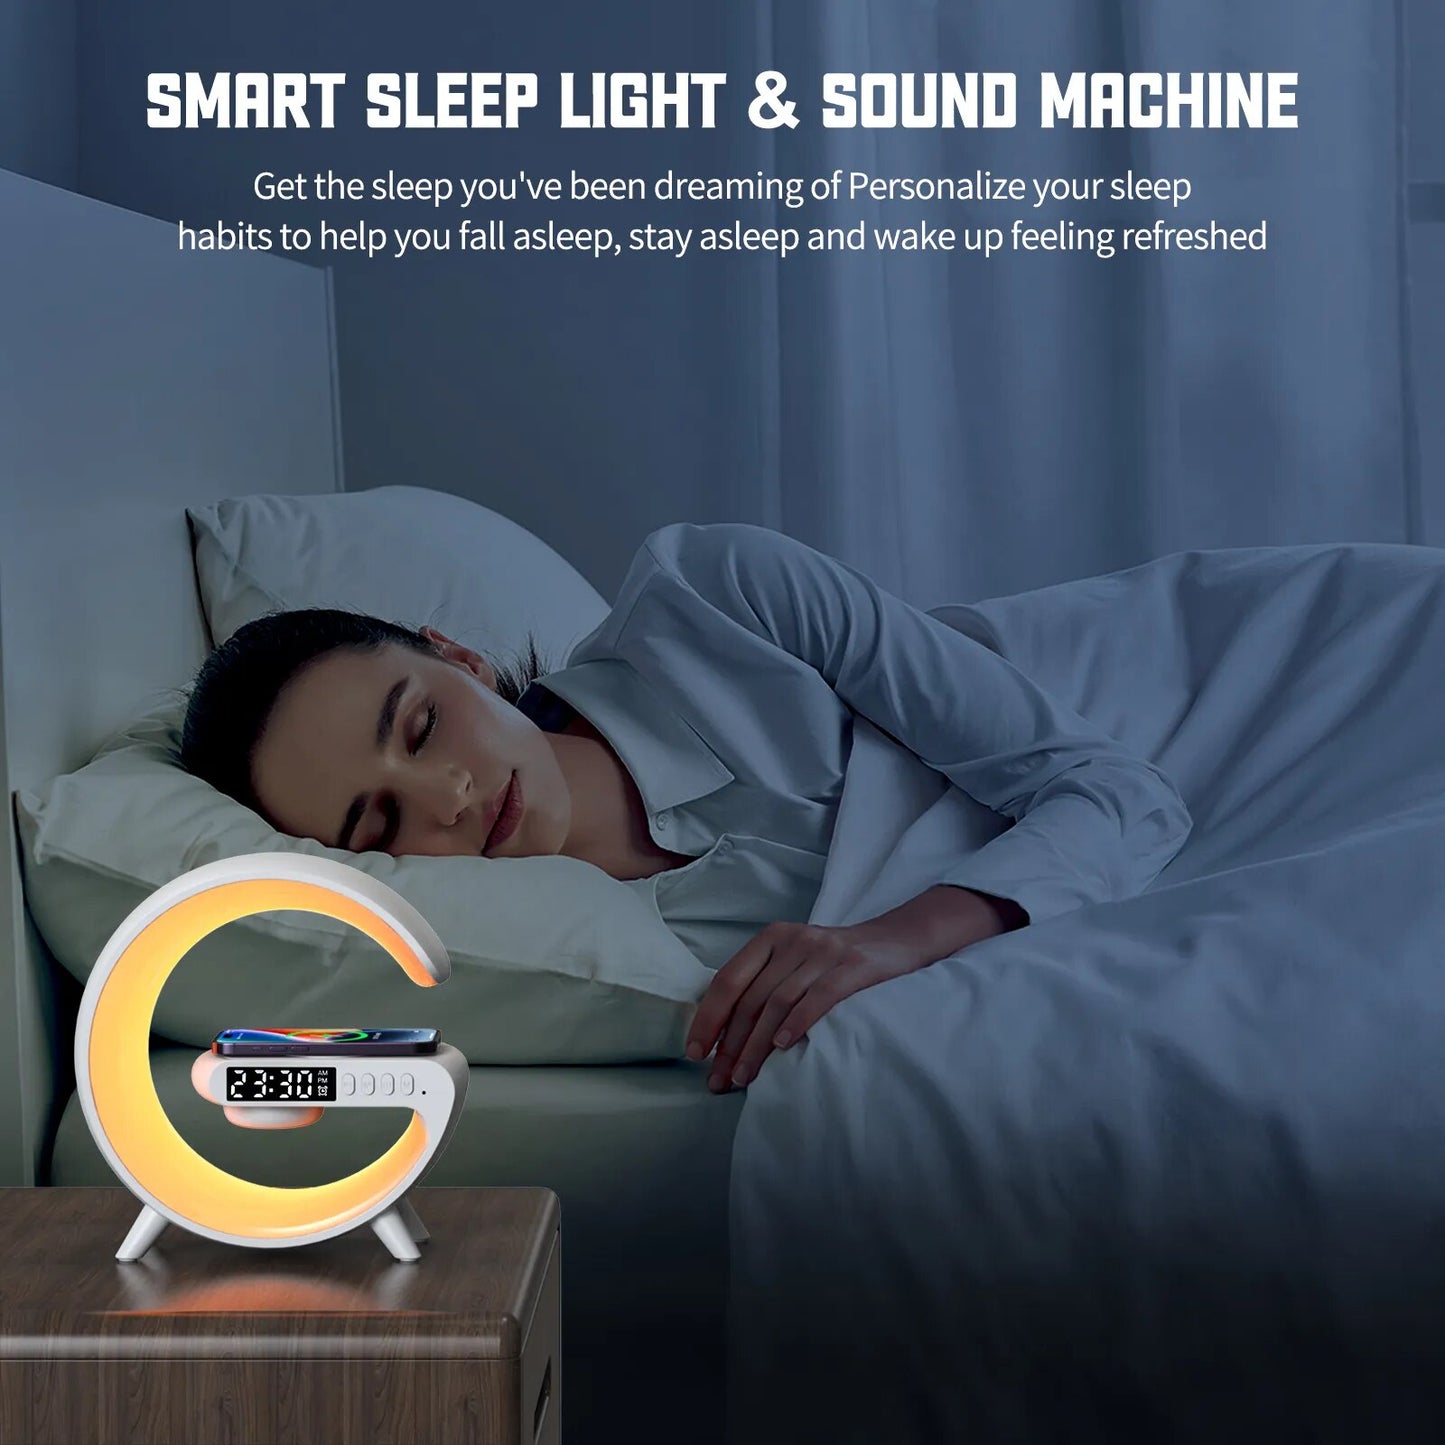 Led Smart Lamp with Alarm Clock, Bluetooth Speaker & Wireless Charging